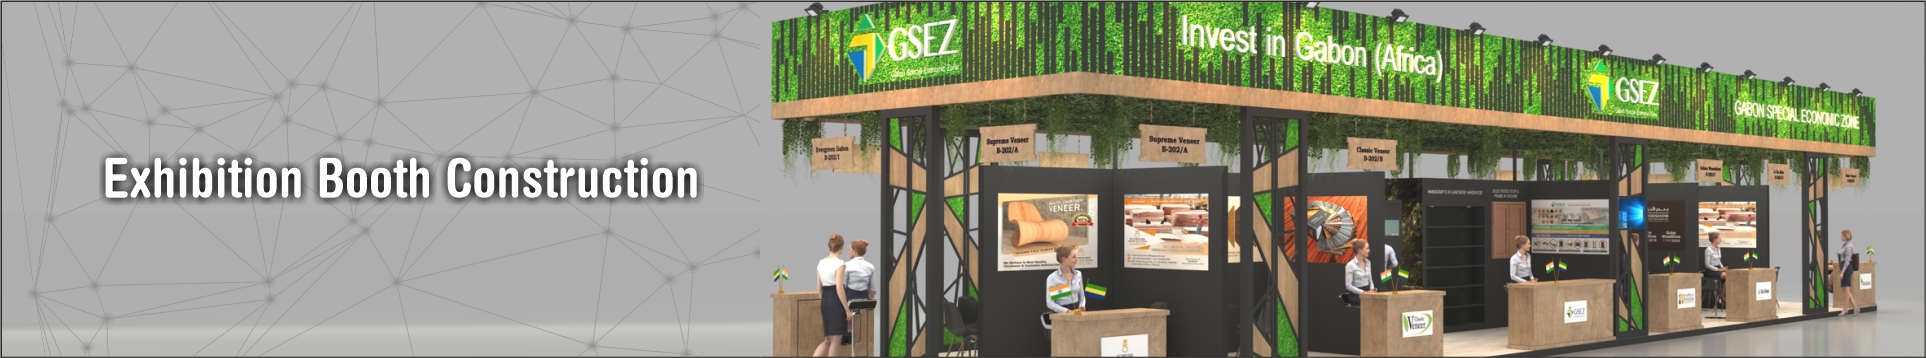 exhibition booth construction banner web